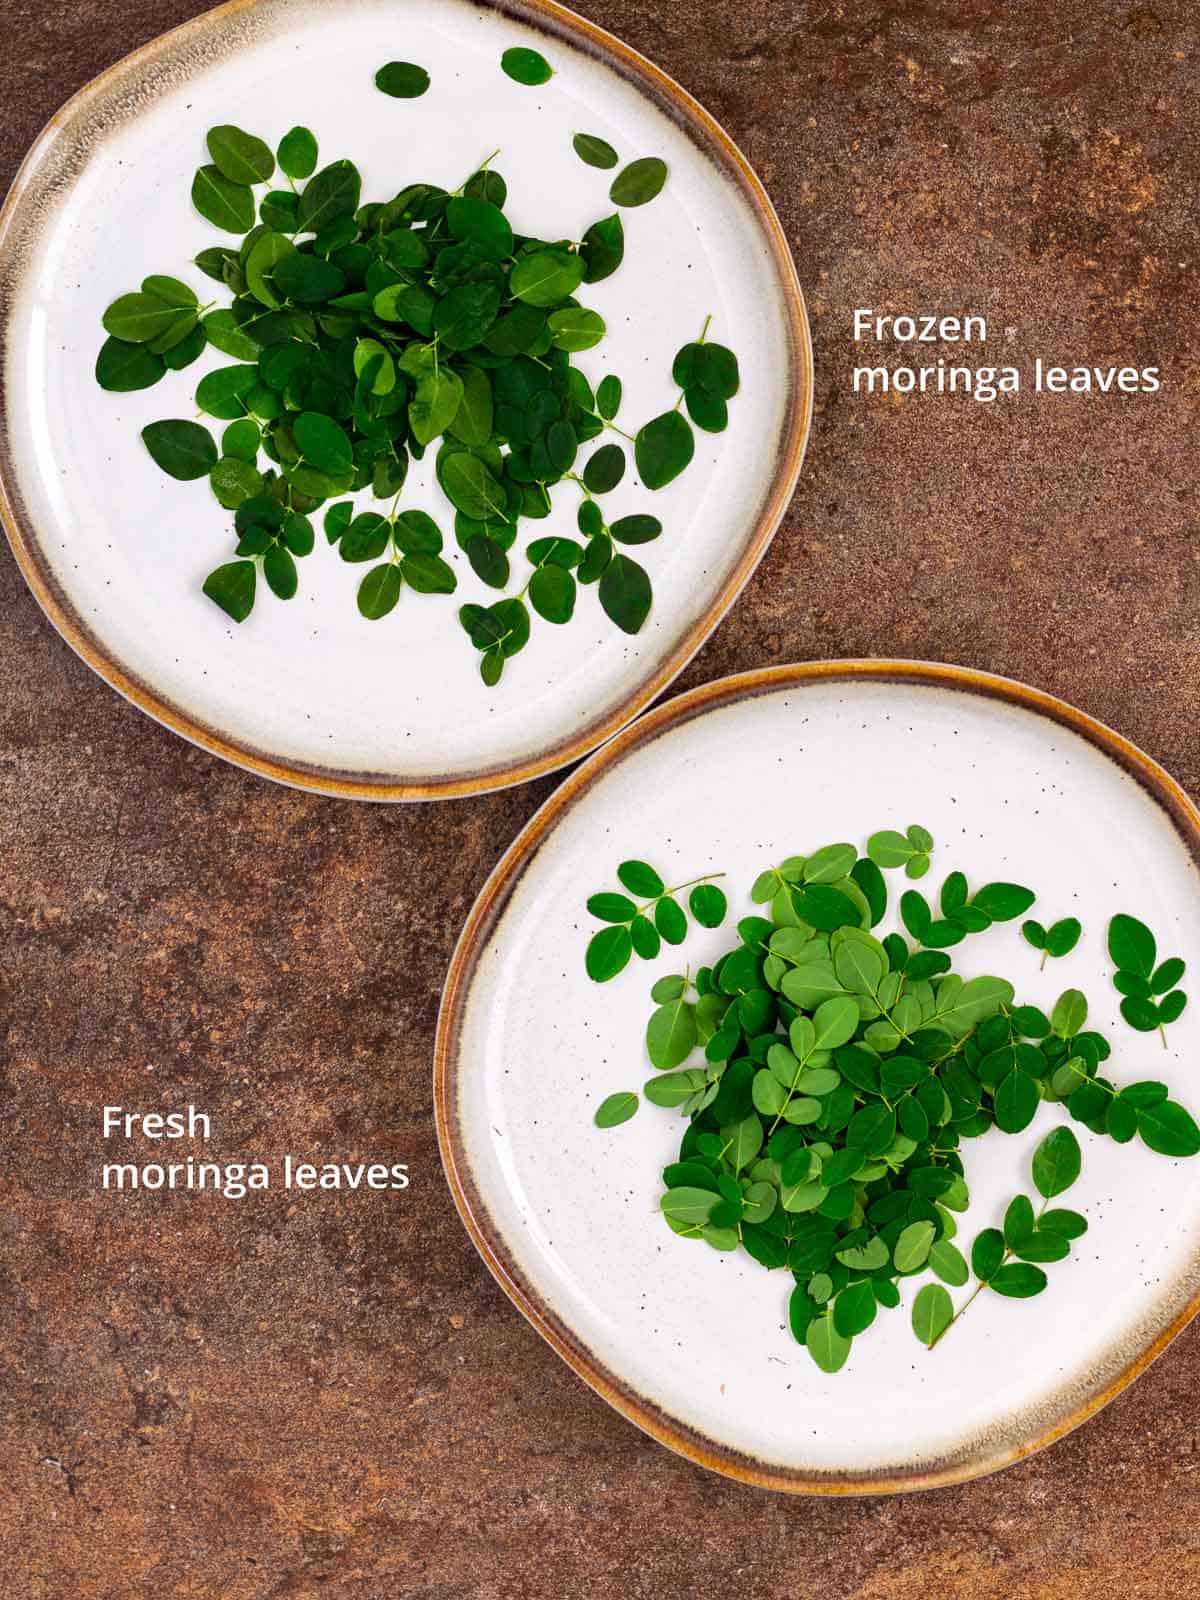 Comparison of fresh and frozen moringa leaves.